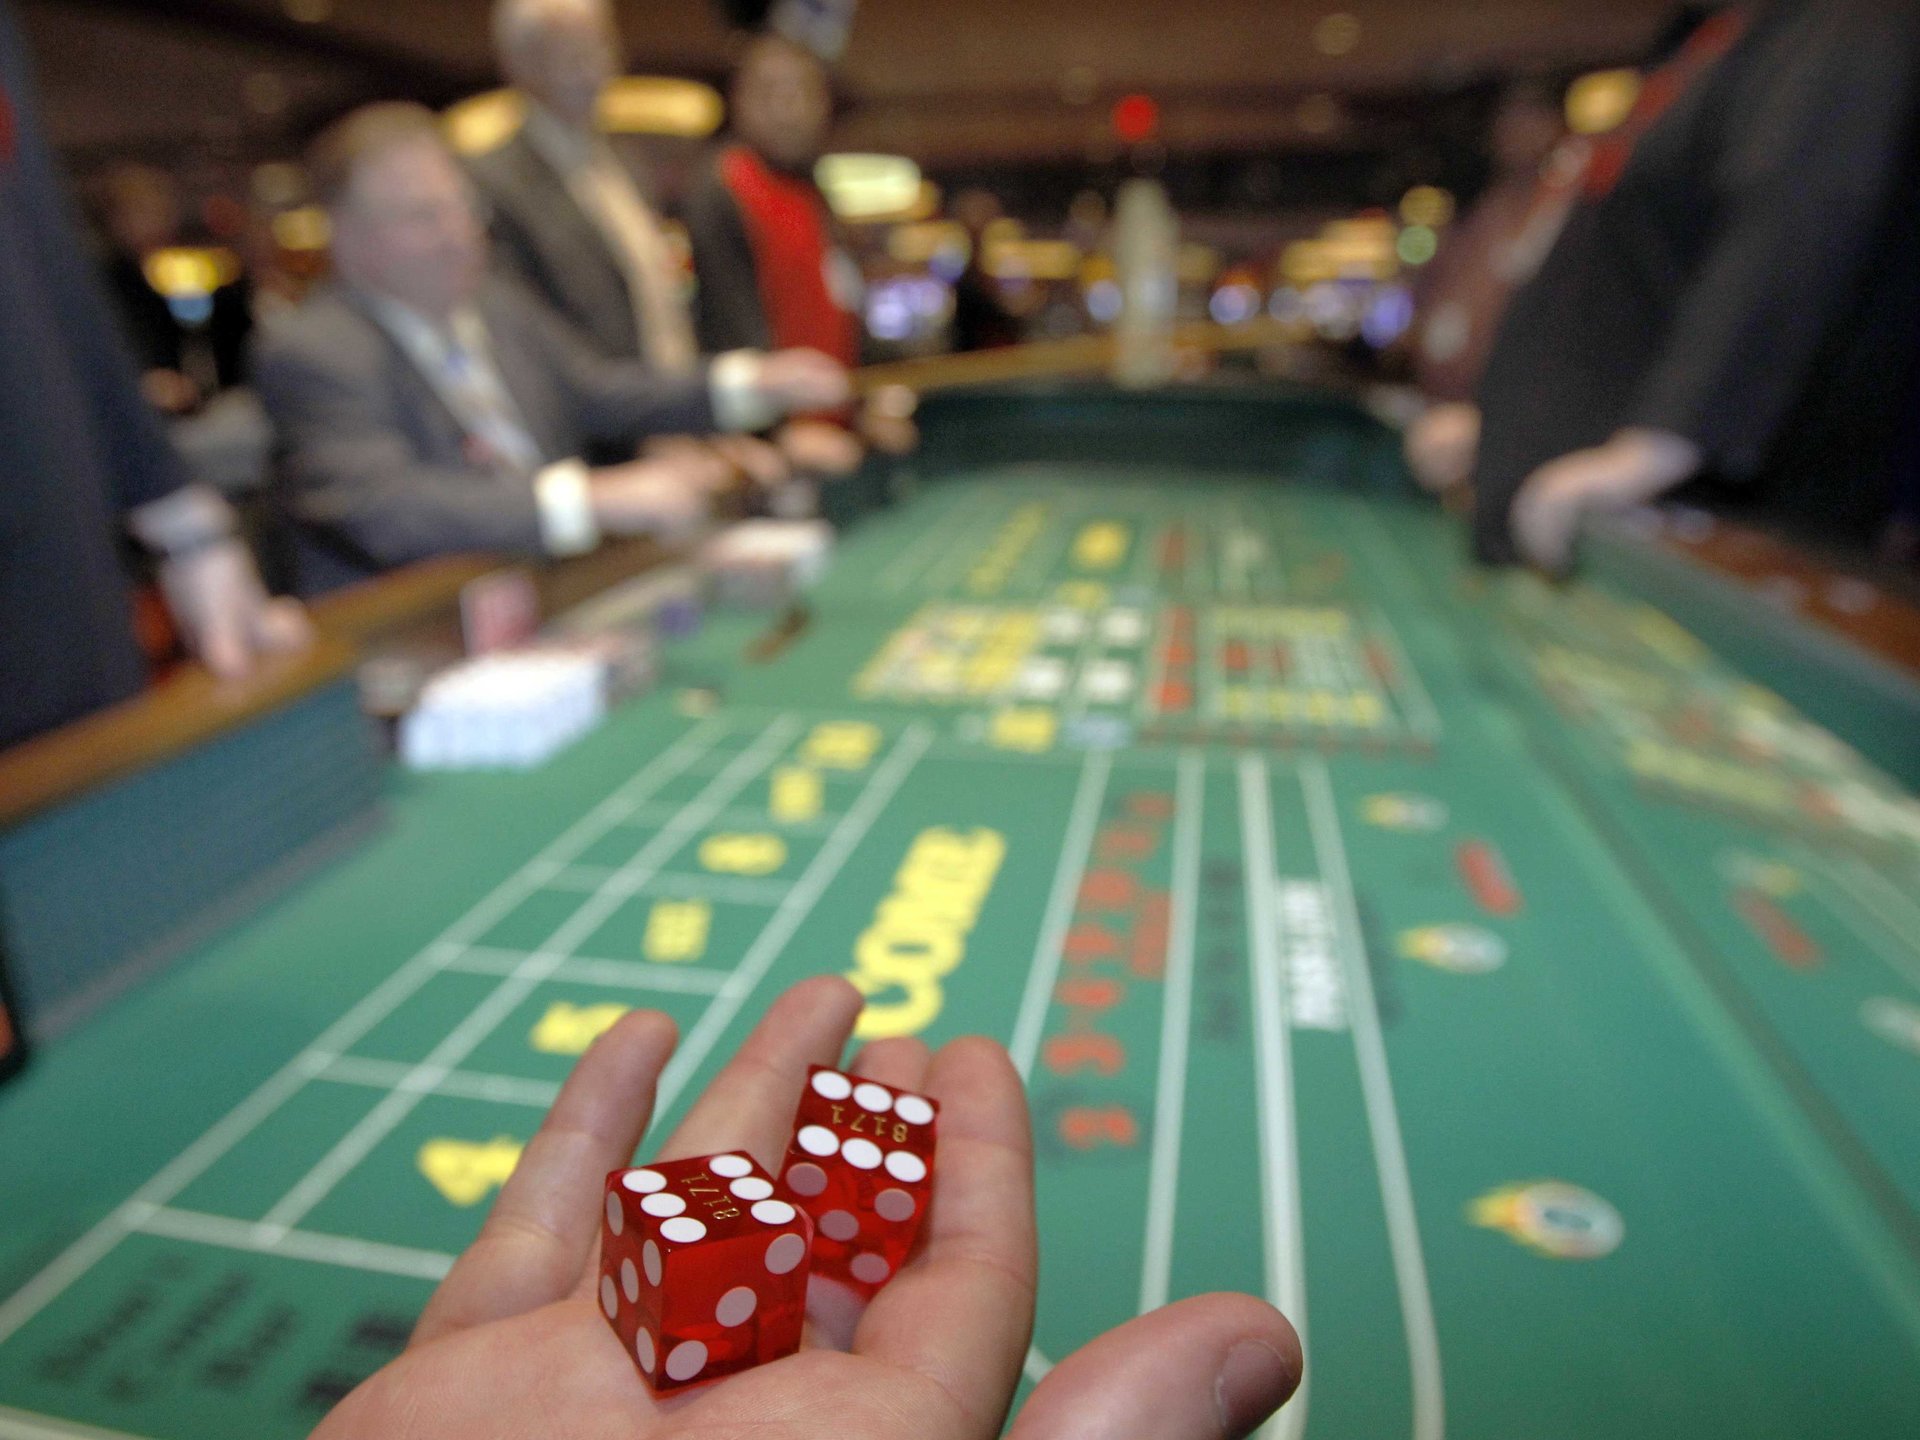 What You Need To Know About Playing Craps: Familiarize Yourself With The Rules Of The Game